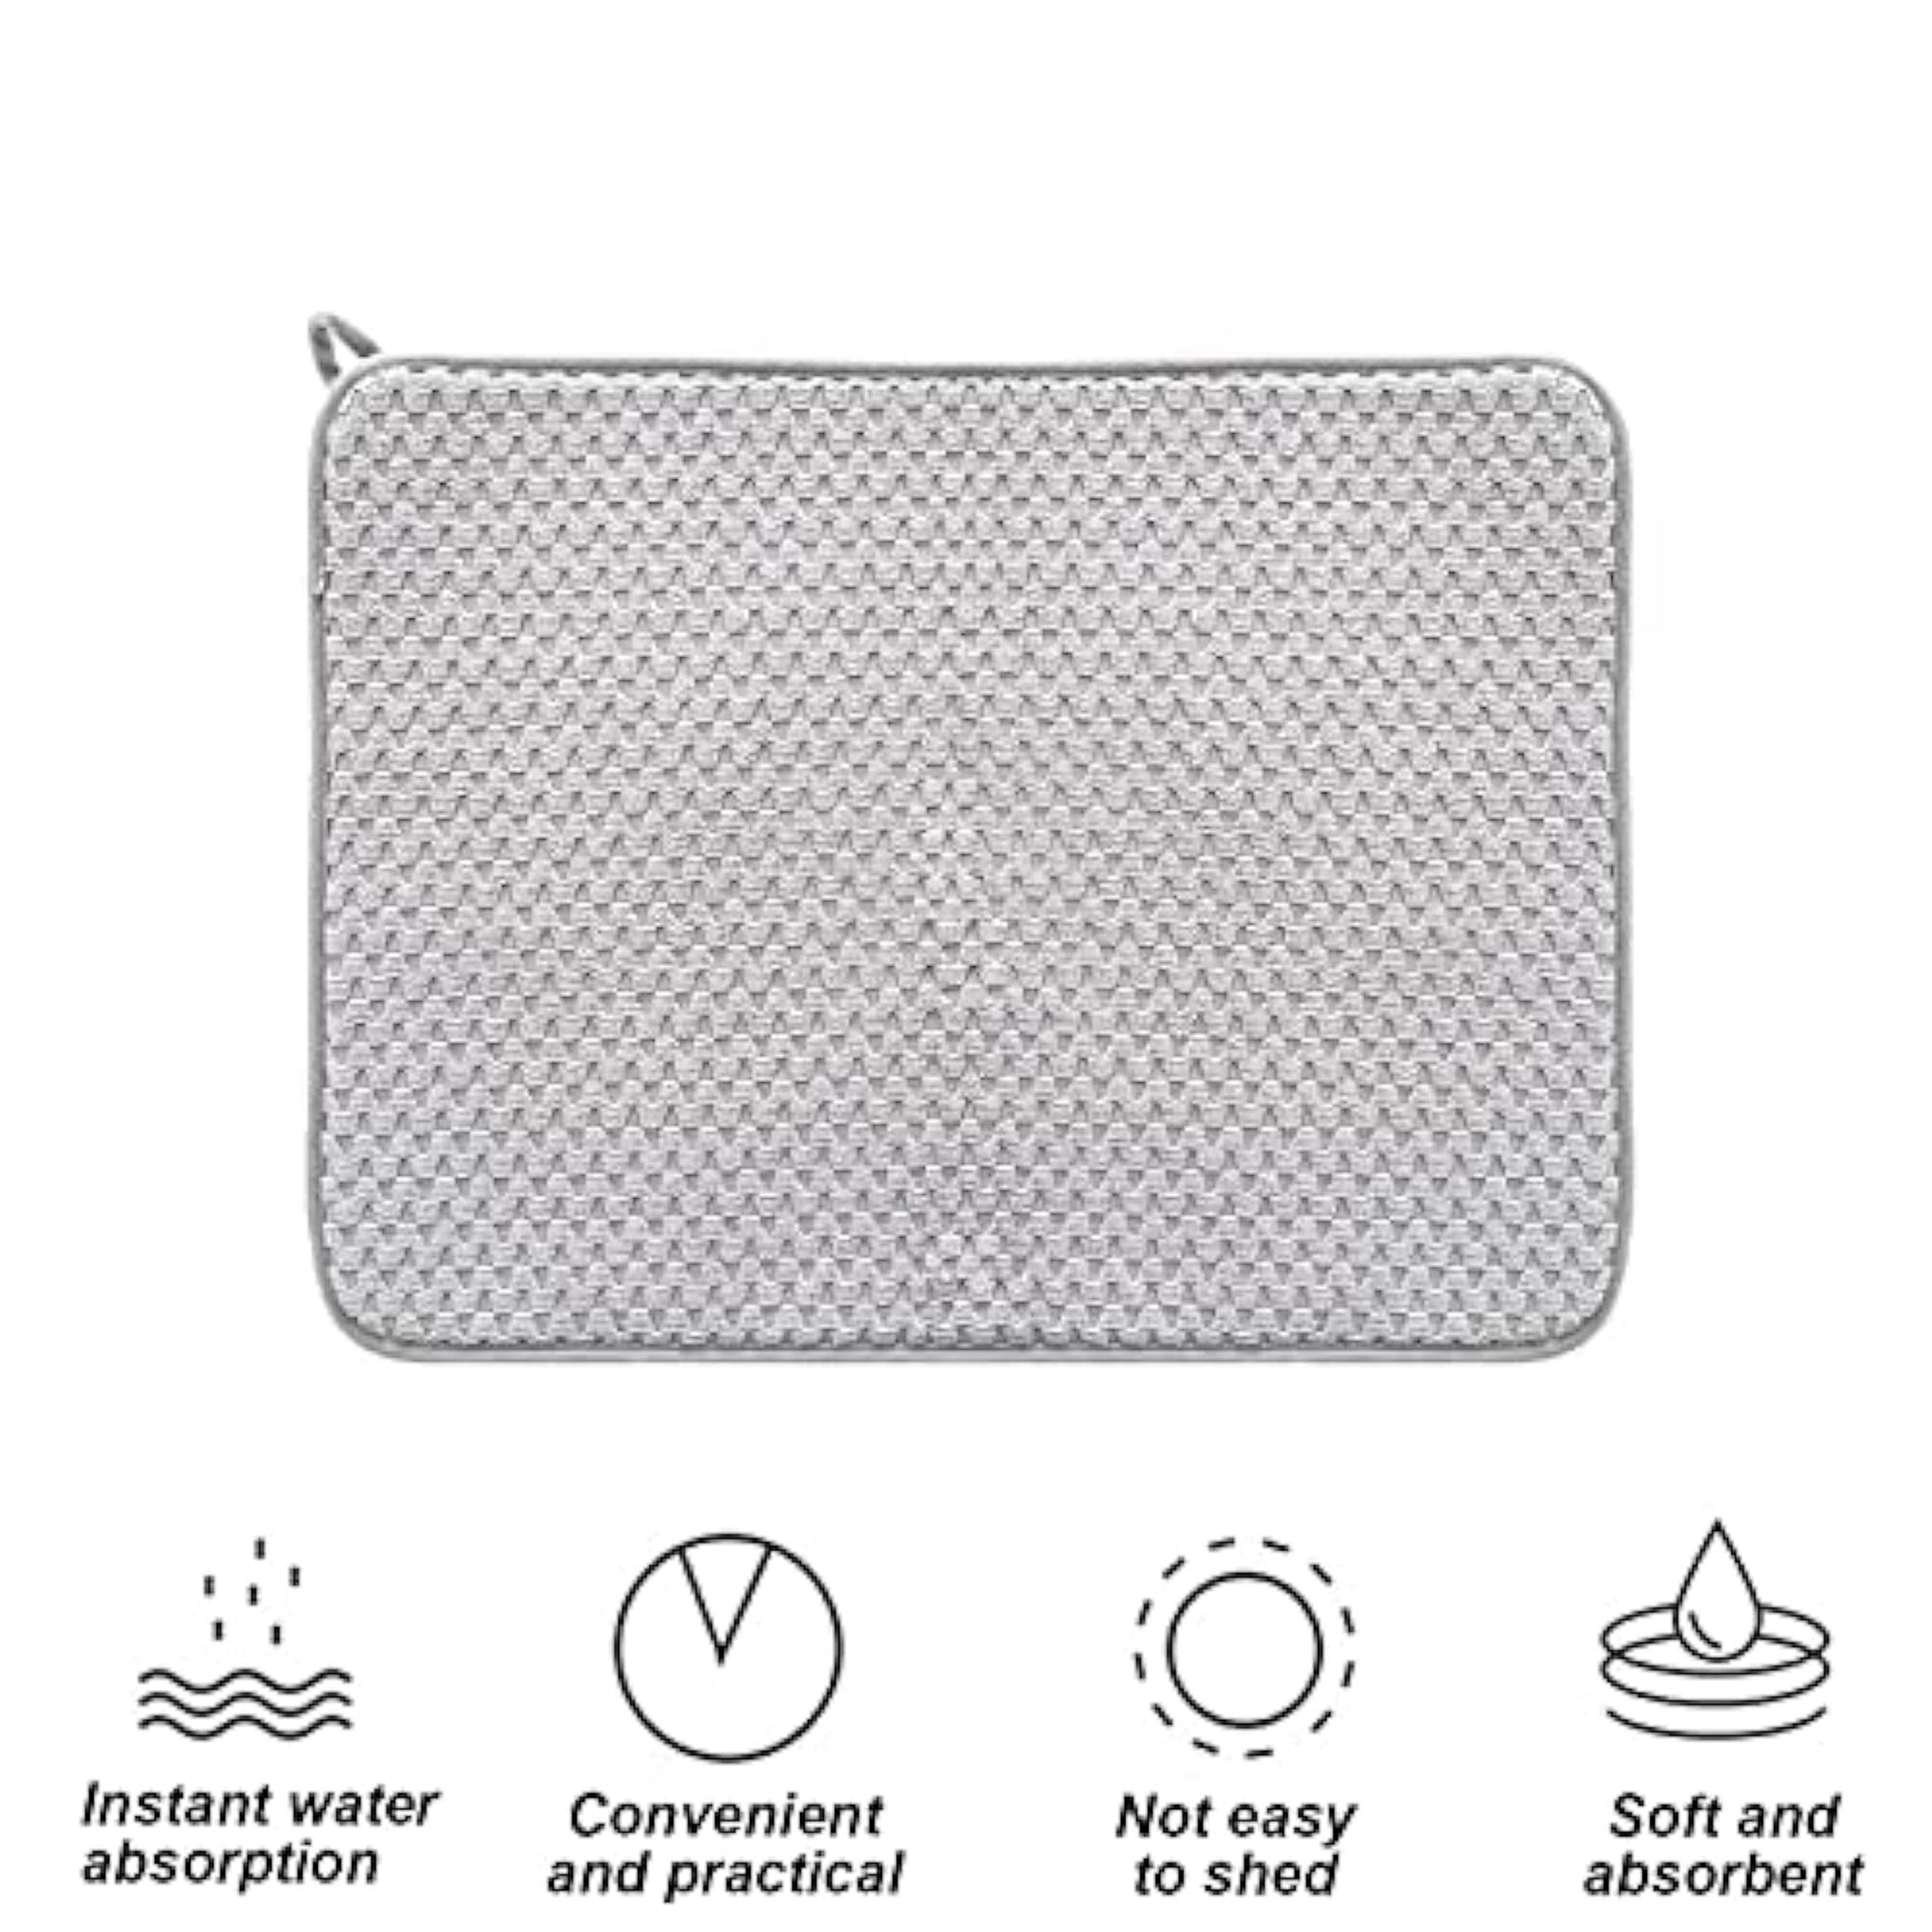 DK177 Dish Drying Mat for Kitchen Counter, Super Absorbent Dish